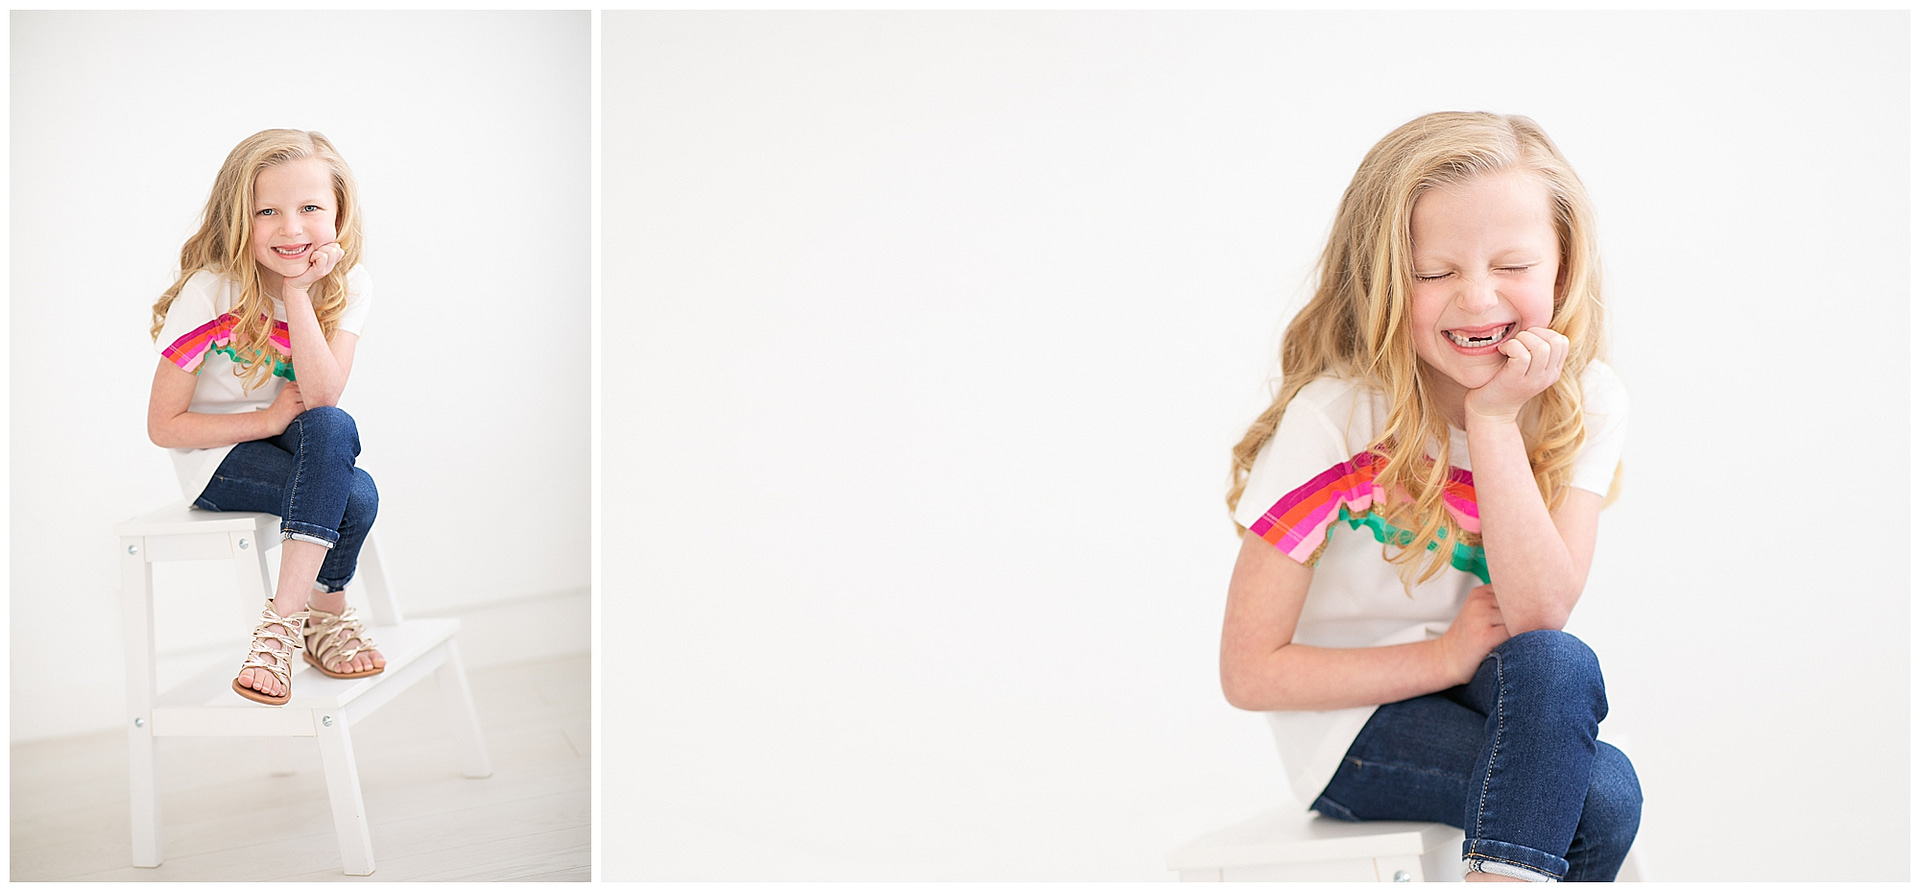 Girl laughs during Boise portrait session. Photos by Tiffany Hix Photography.